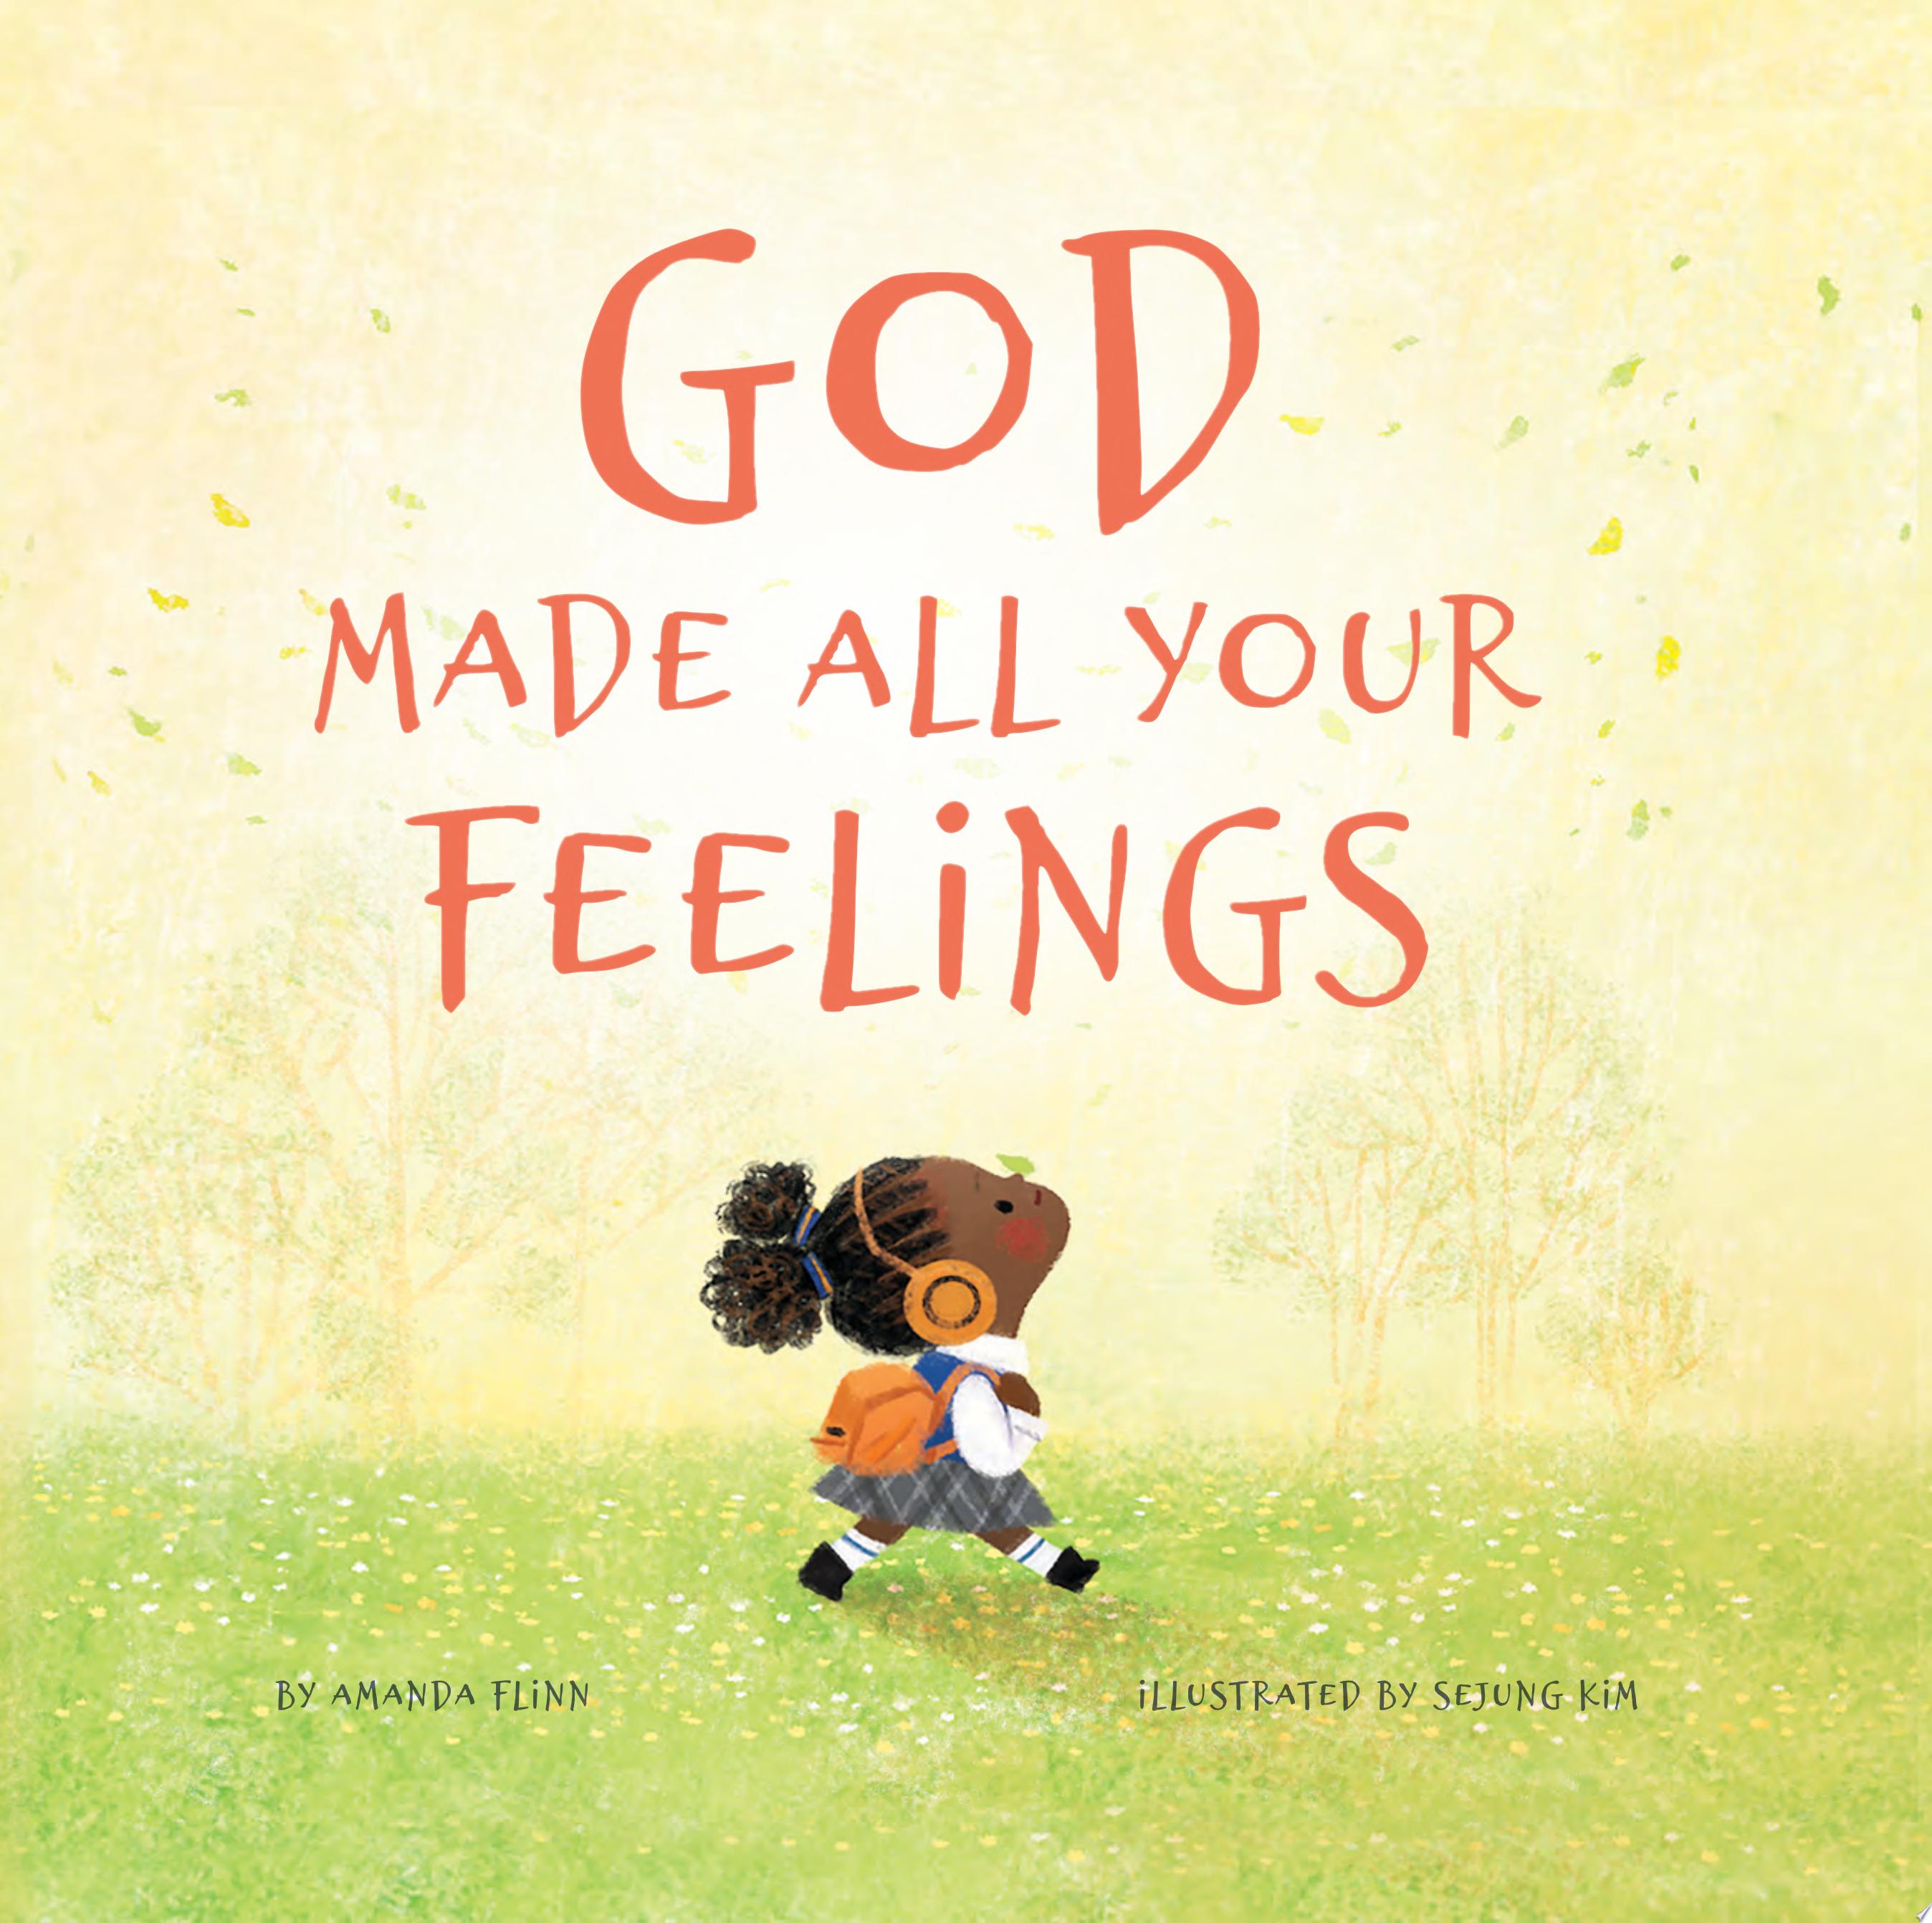 Image for "God Made All Your Feelings"